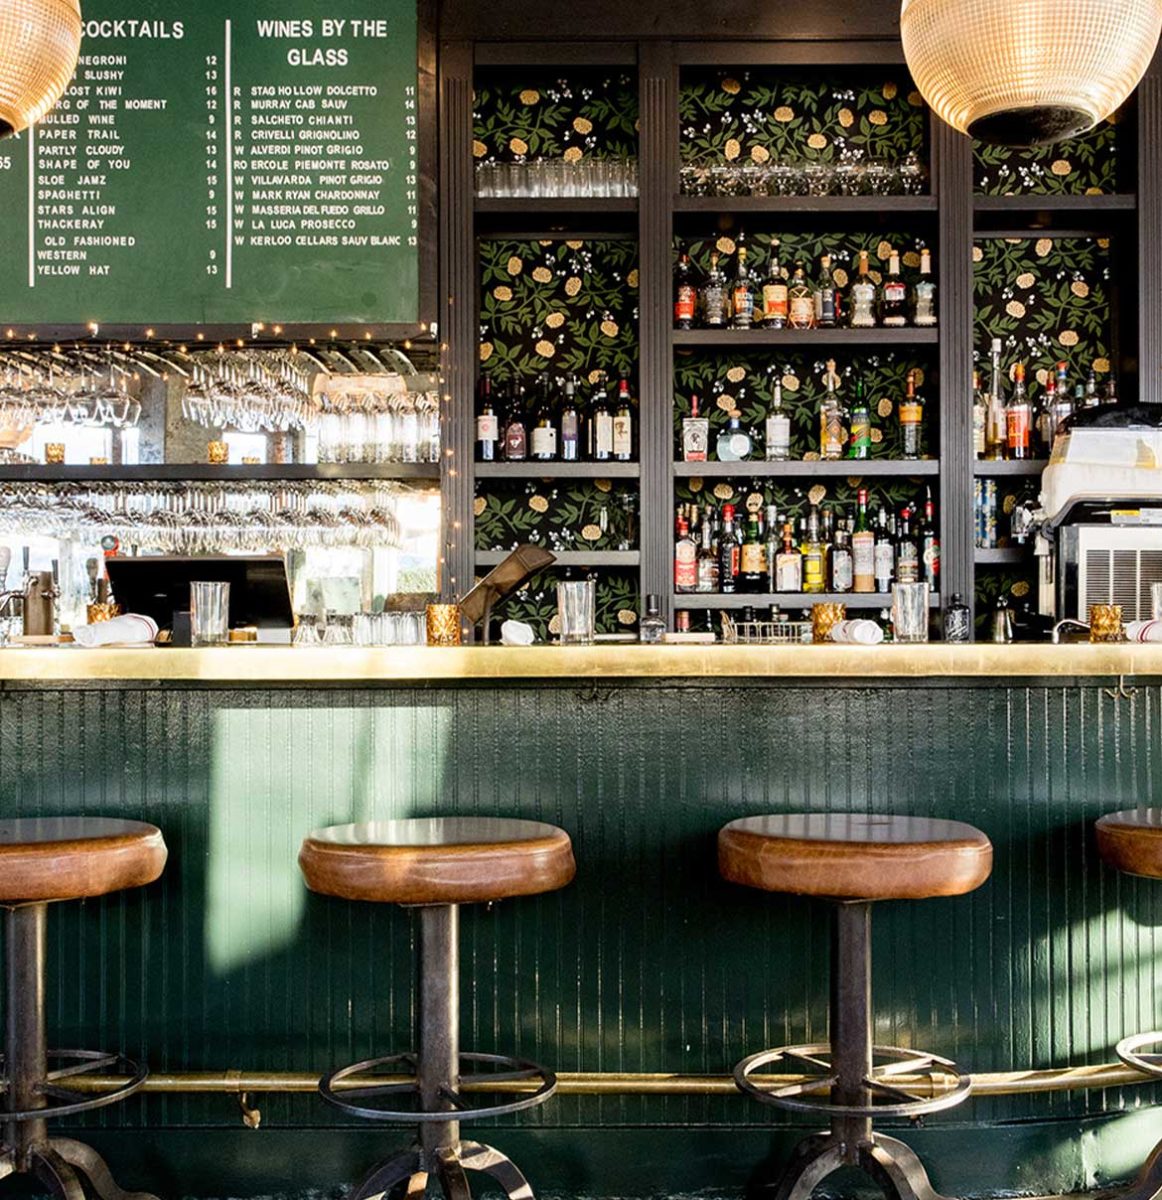 the bar at fiasco features a warm brass bar top, the backbar is lined with a modern floral wallpaper in shads of green and grass.